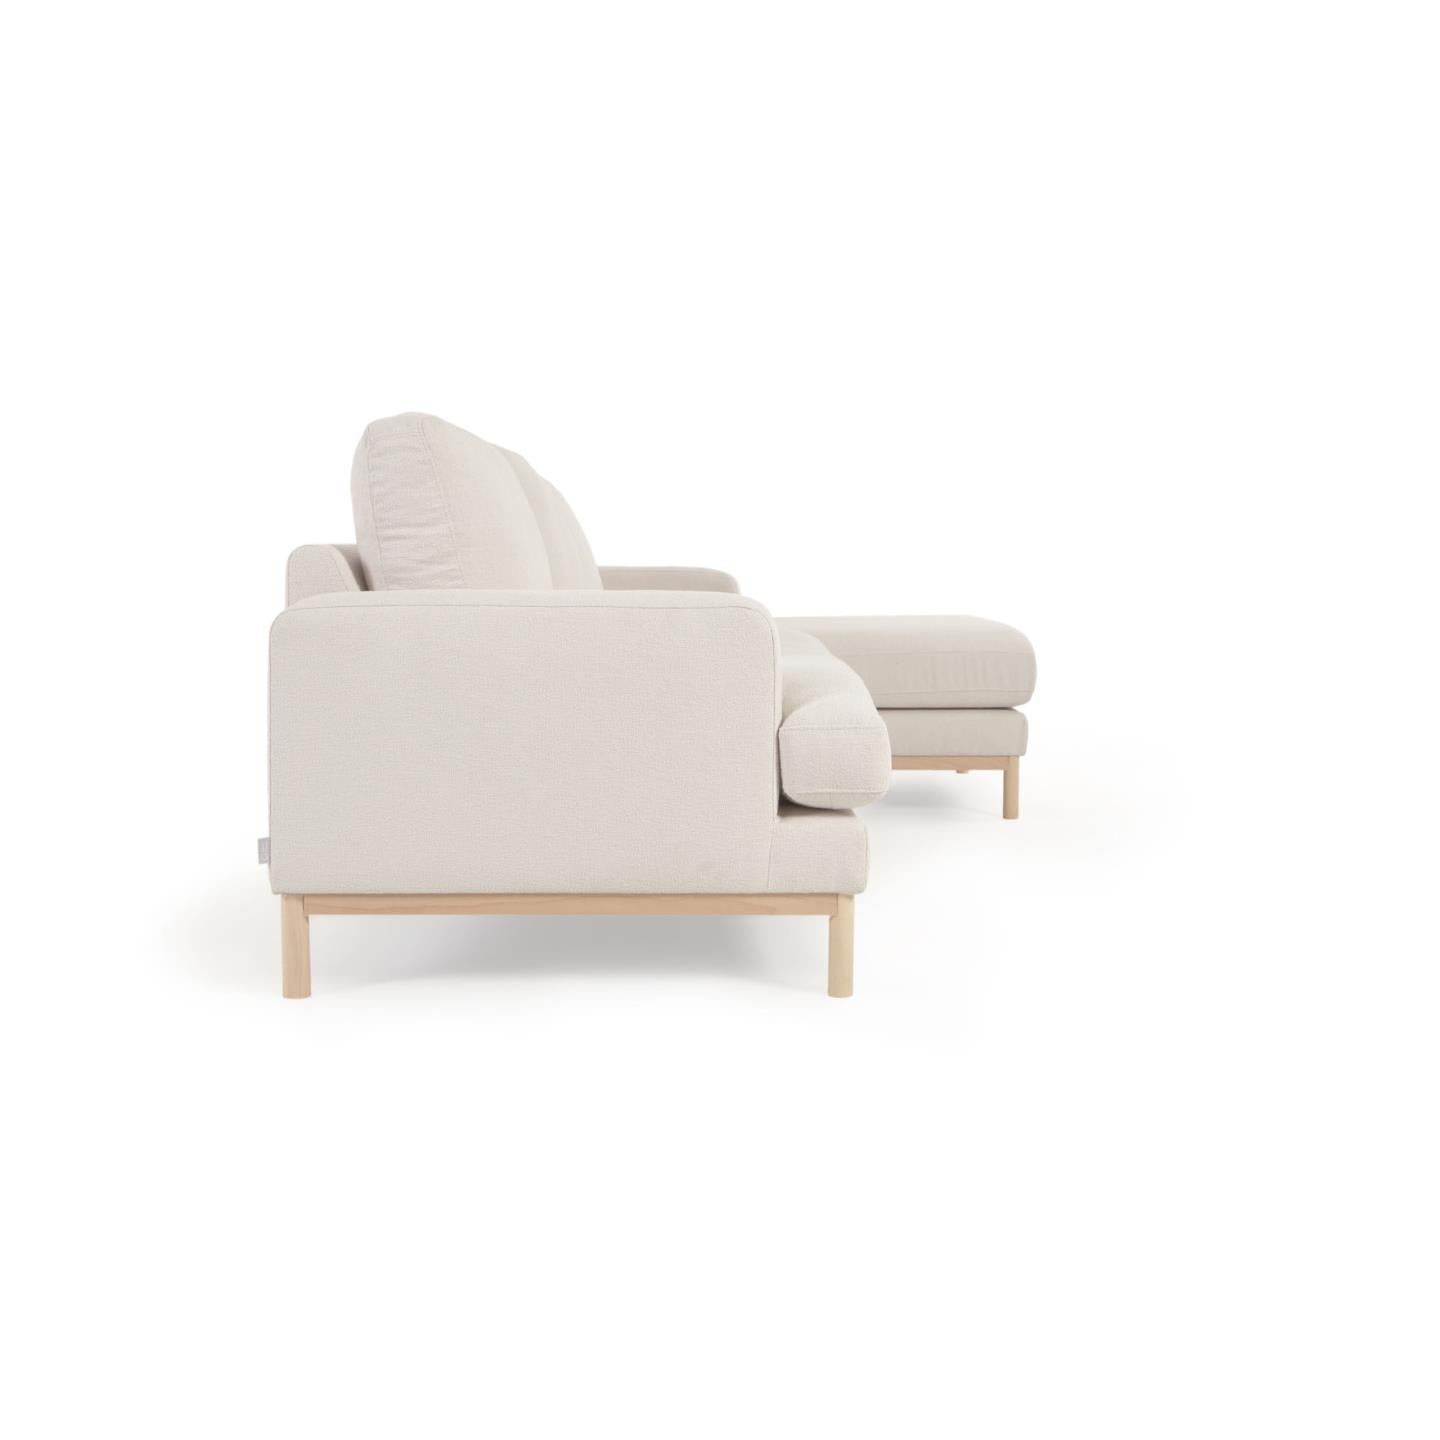 Mihaela 3 seater sofa with right-hand chaise longue in white fleece, 264 cm